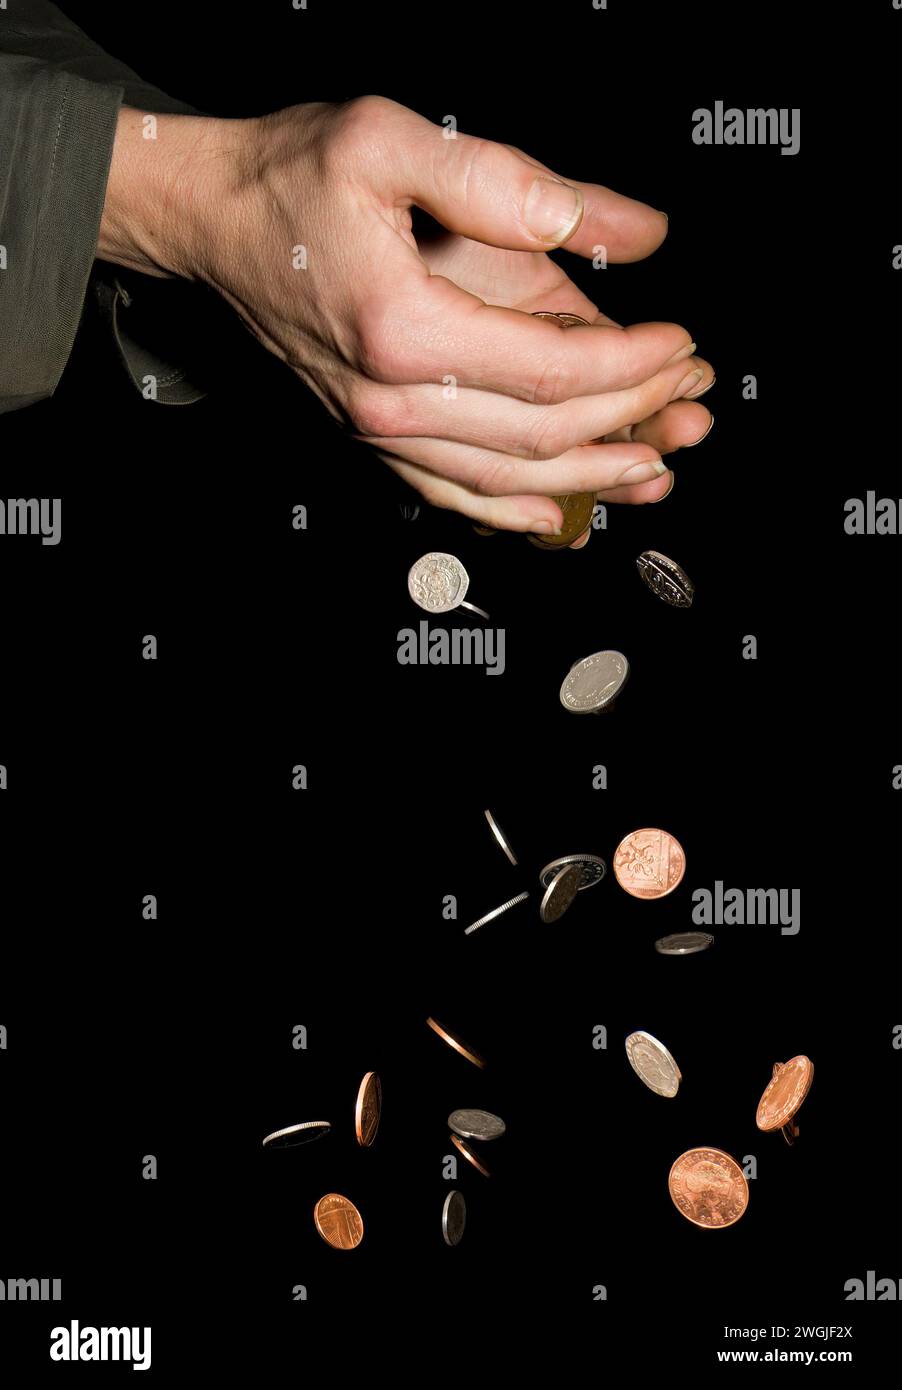 Caucasian male (42 yrs old) hands with money falling depicting the concept of ‘money slipping through hands’ or ‘too much money to hold’ Stock Photo